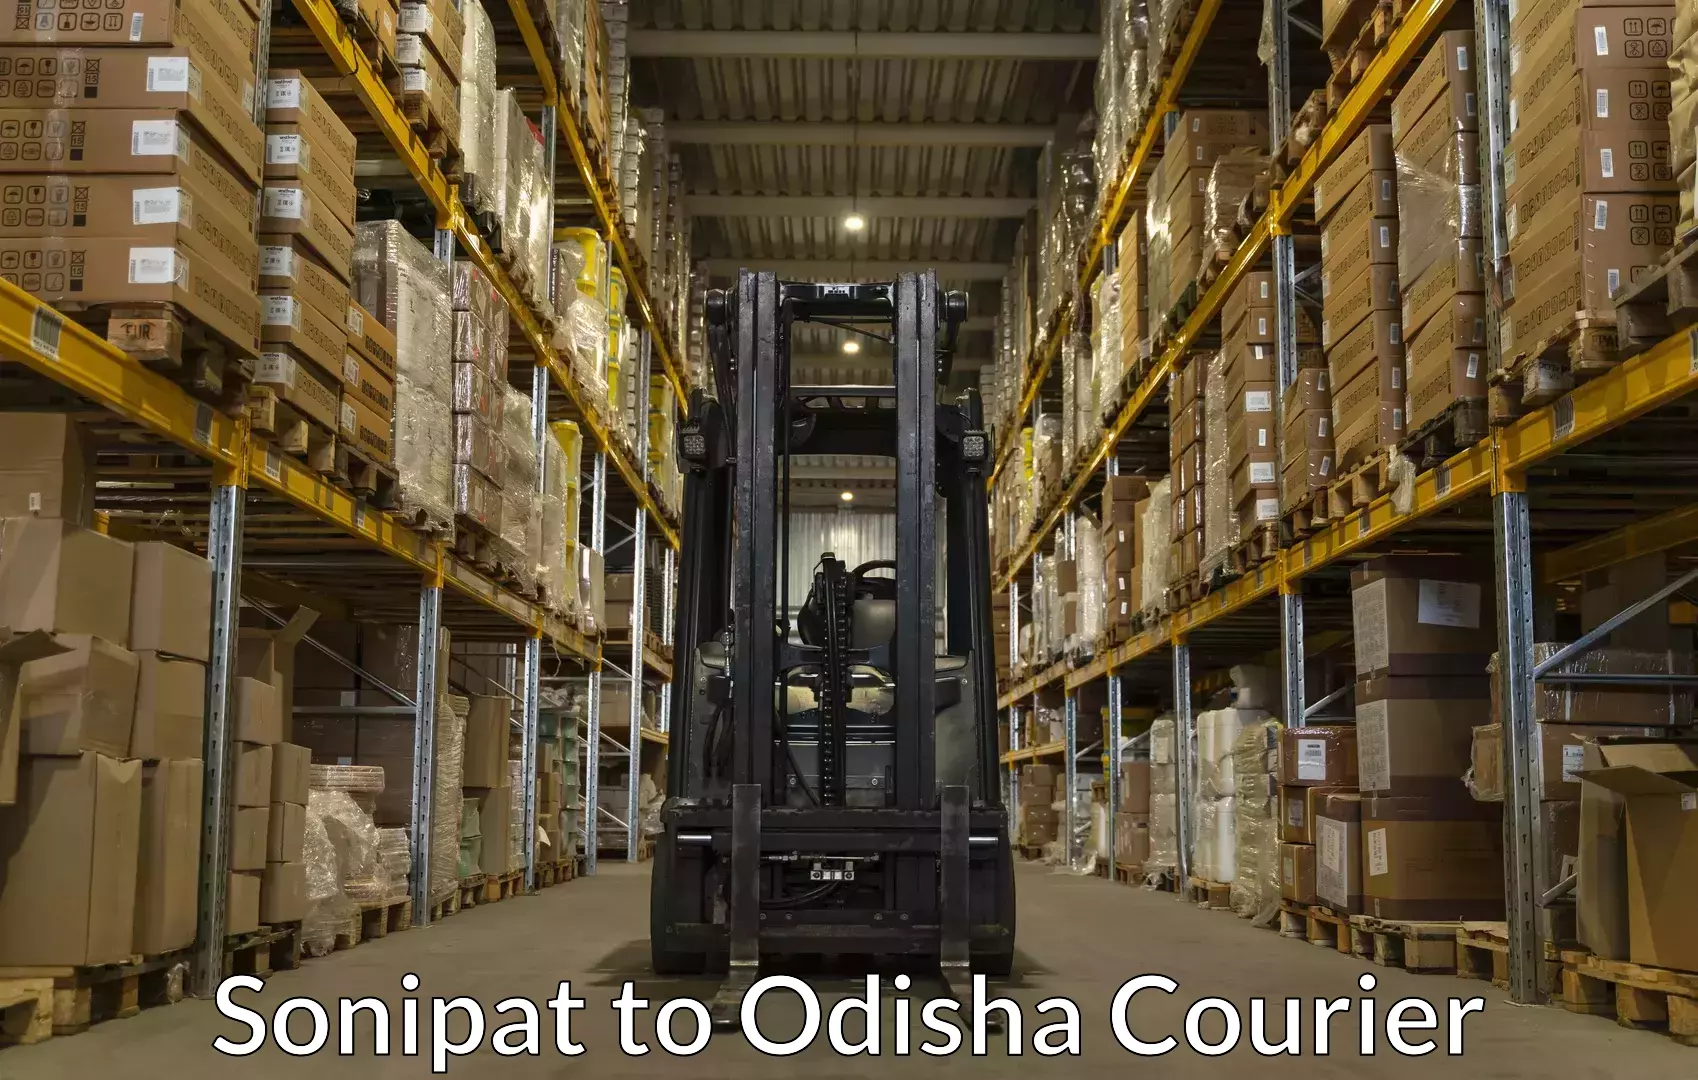 Excess baggage transport in Sonipat to Odisha